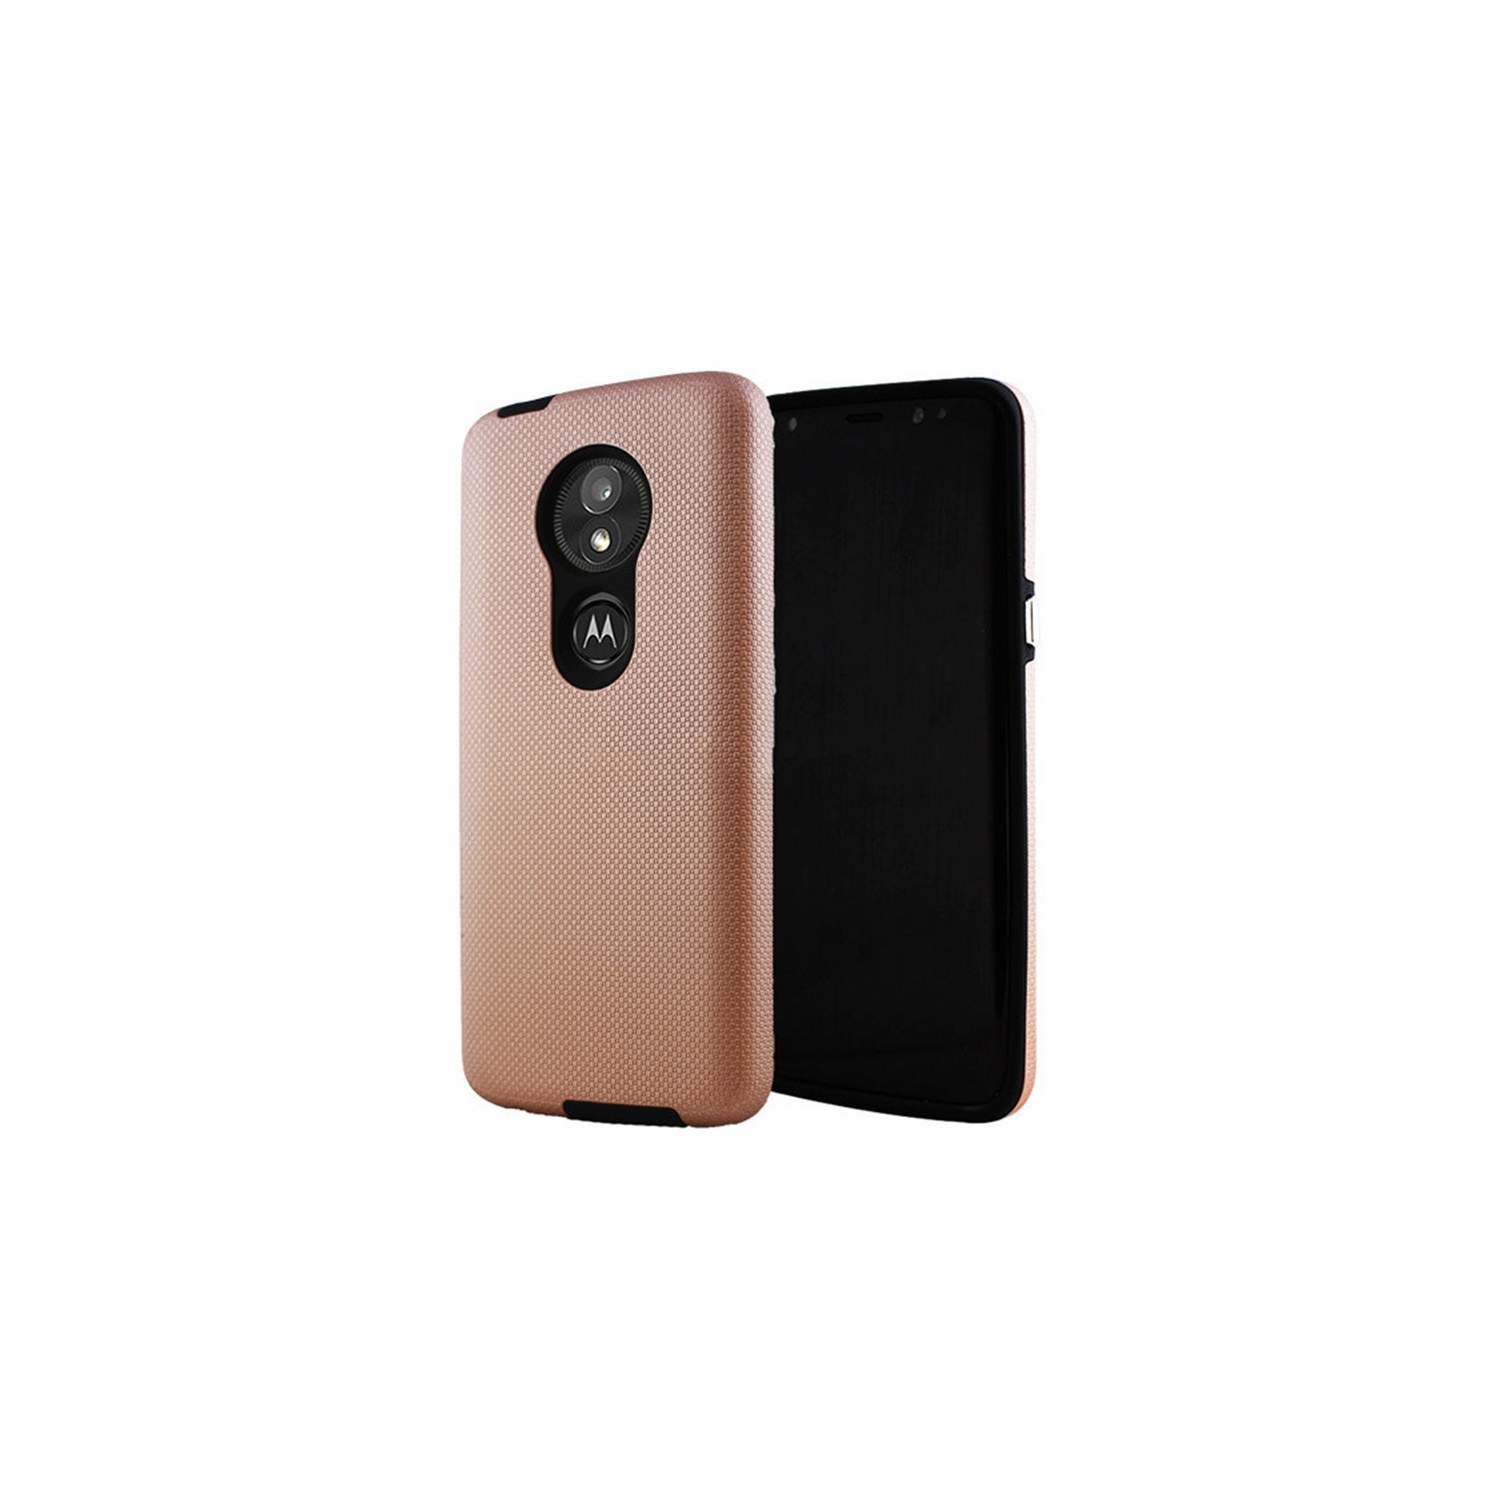 【CSmart】 Slim Fitted Hybrid Hard PC Shell Shockproof Scratch Resistant Case Cover for Motorola Moto E5 Play, Rose Gold